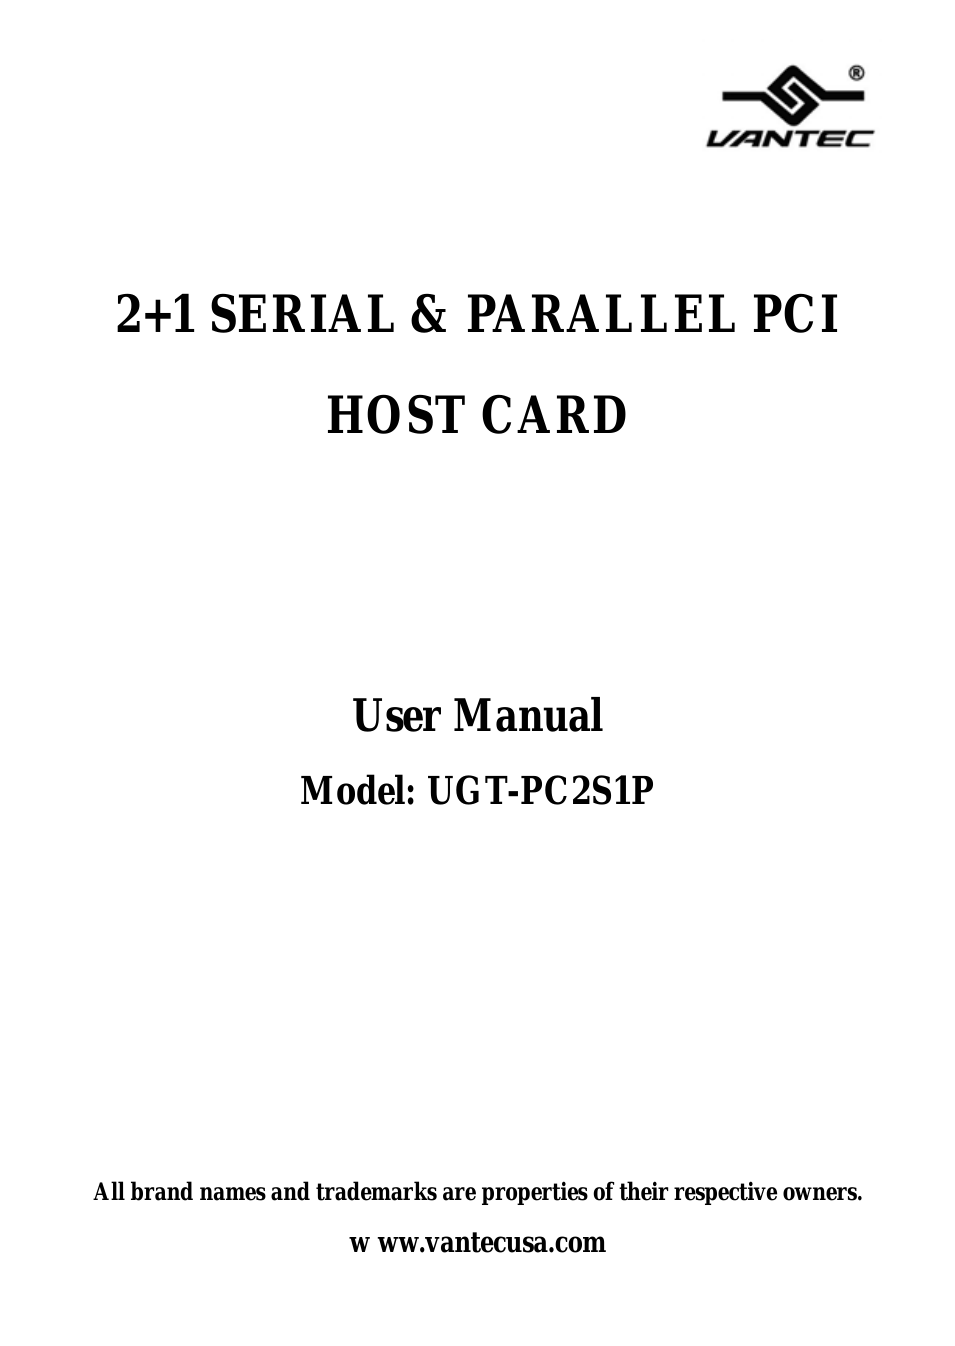 UGT-PC2S1P